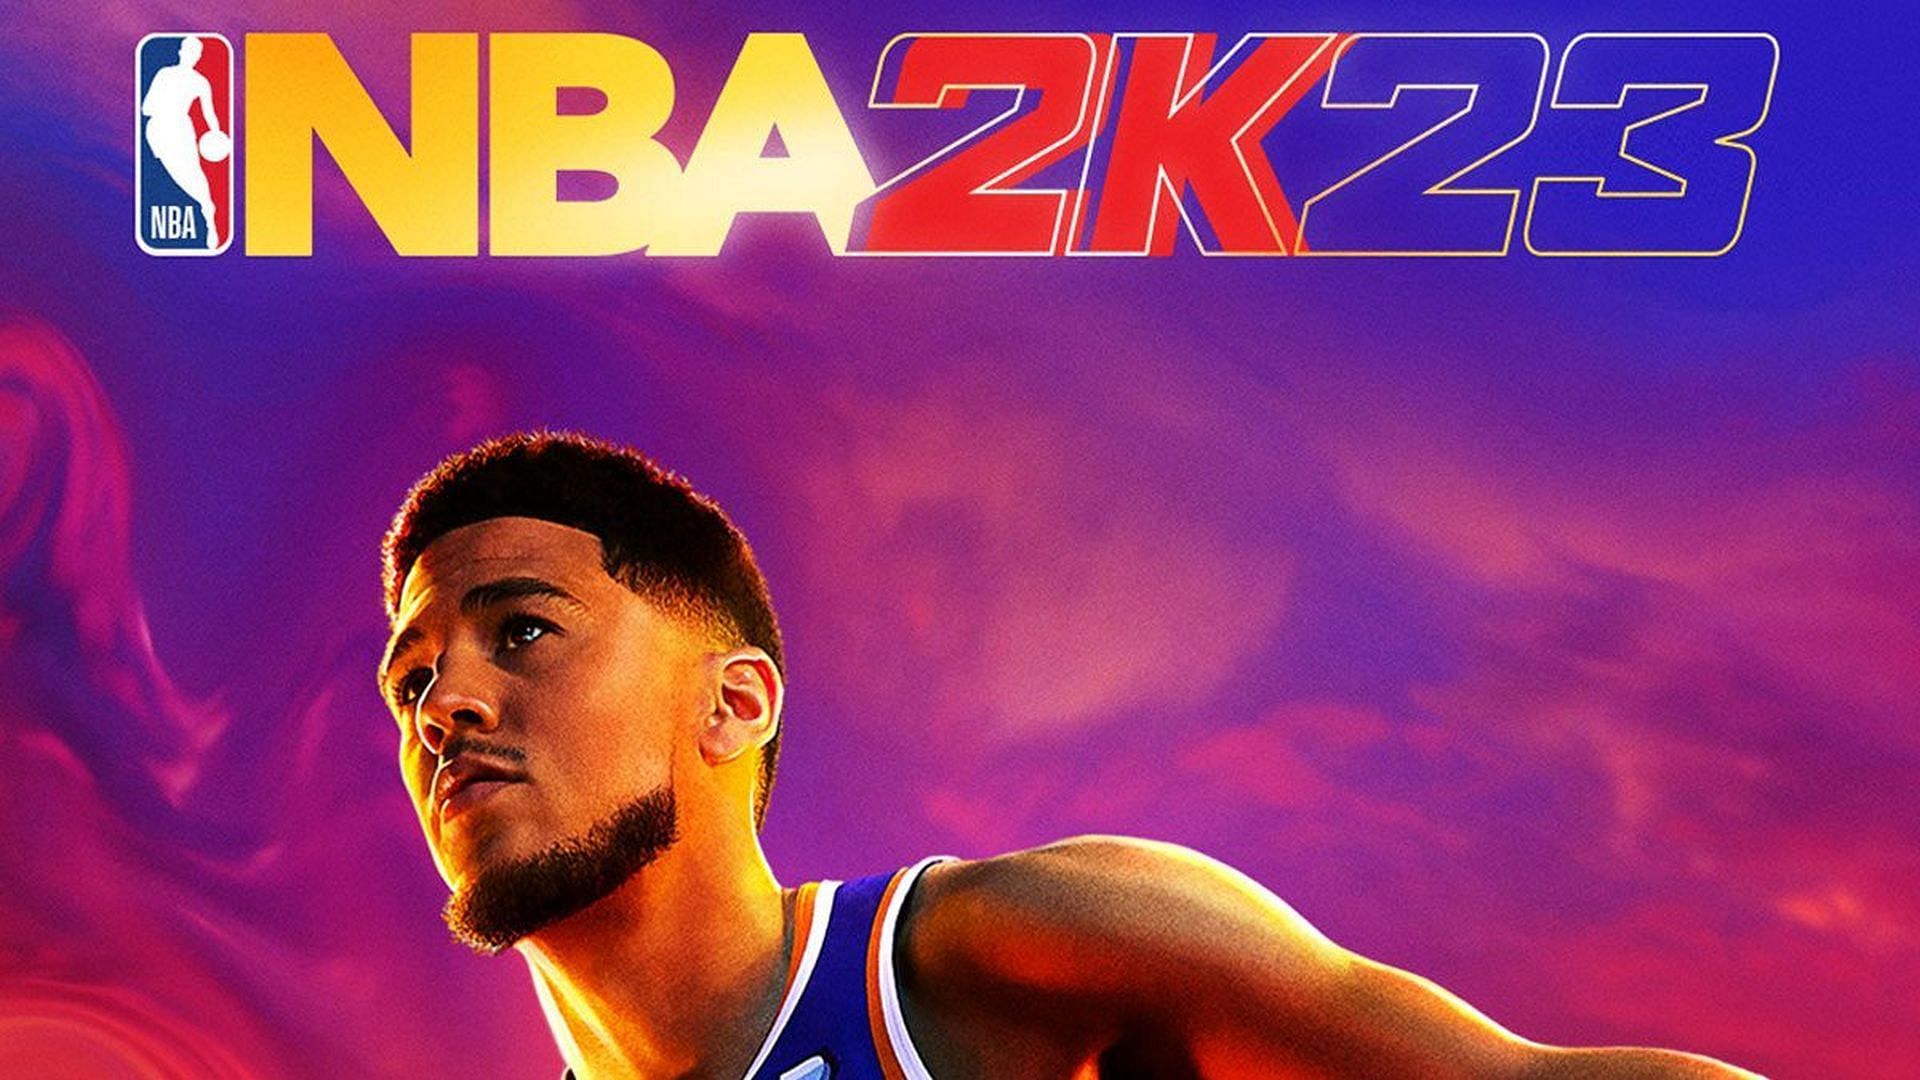 NBA 2K23 is the most realistic game of the series yet.